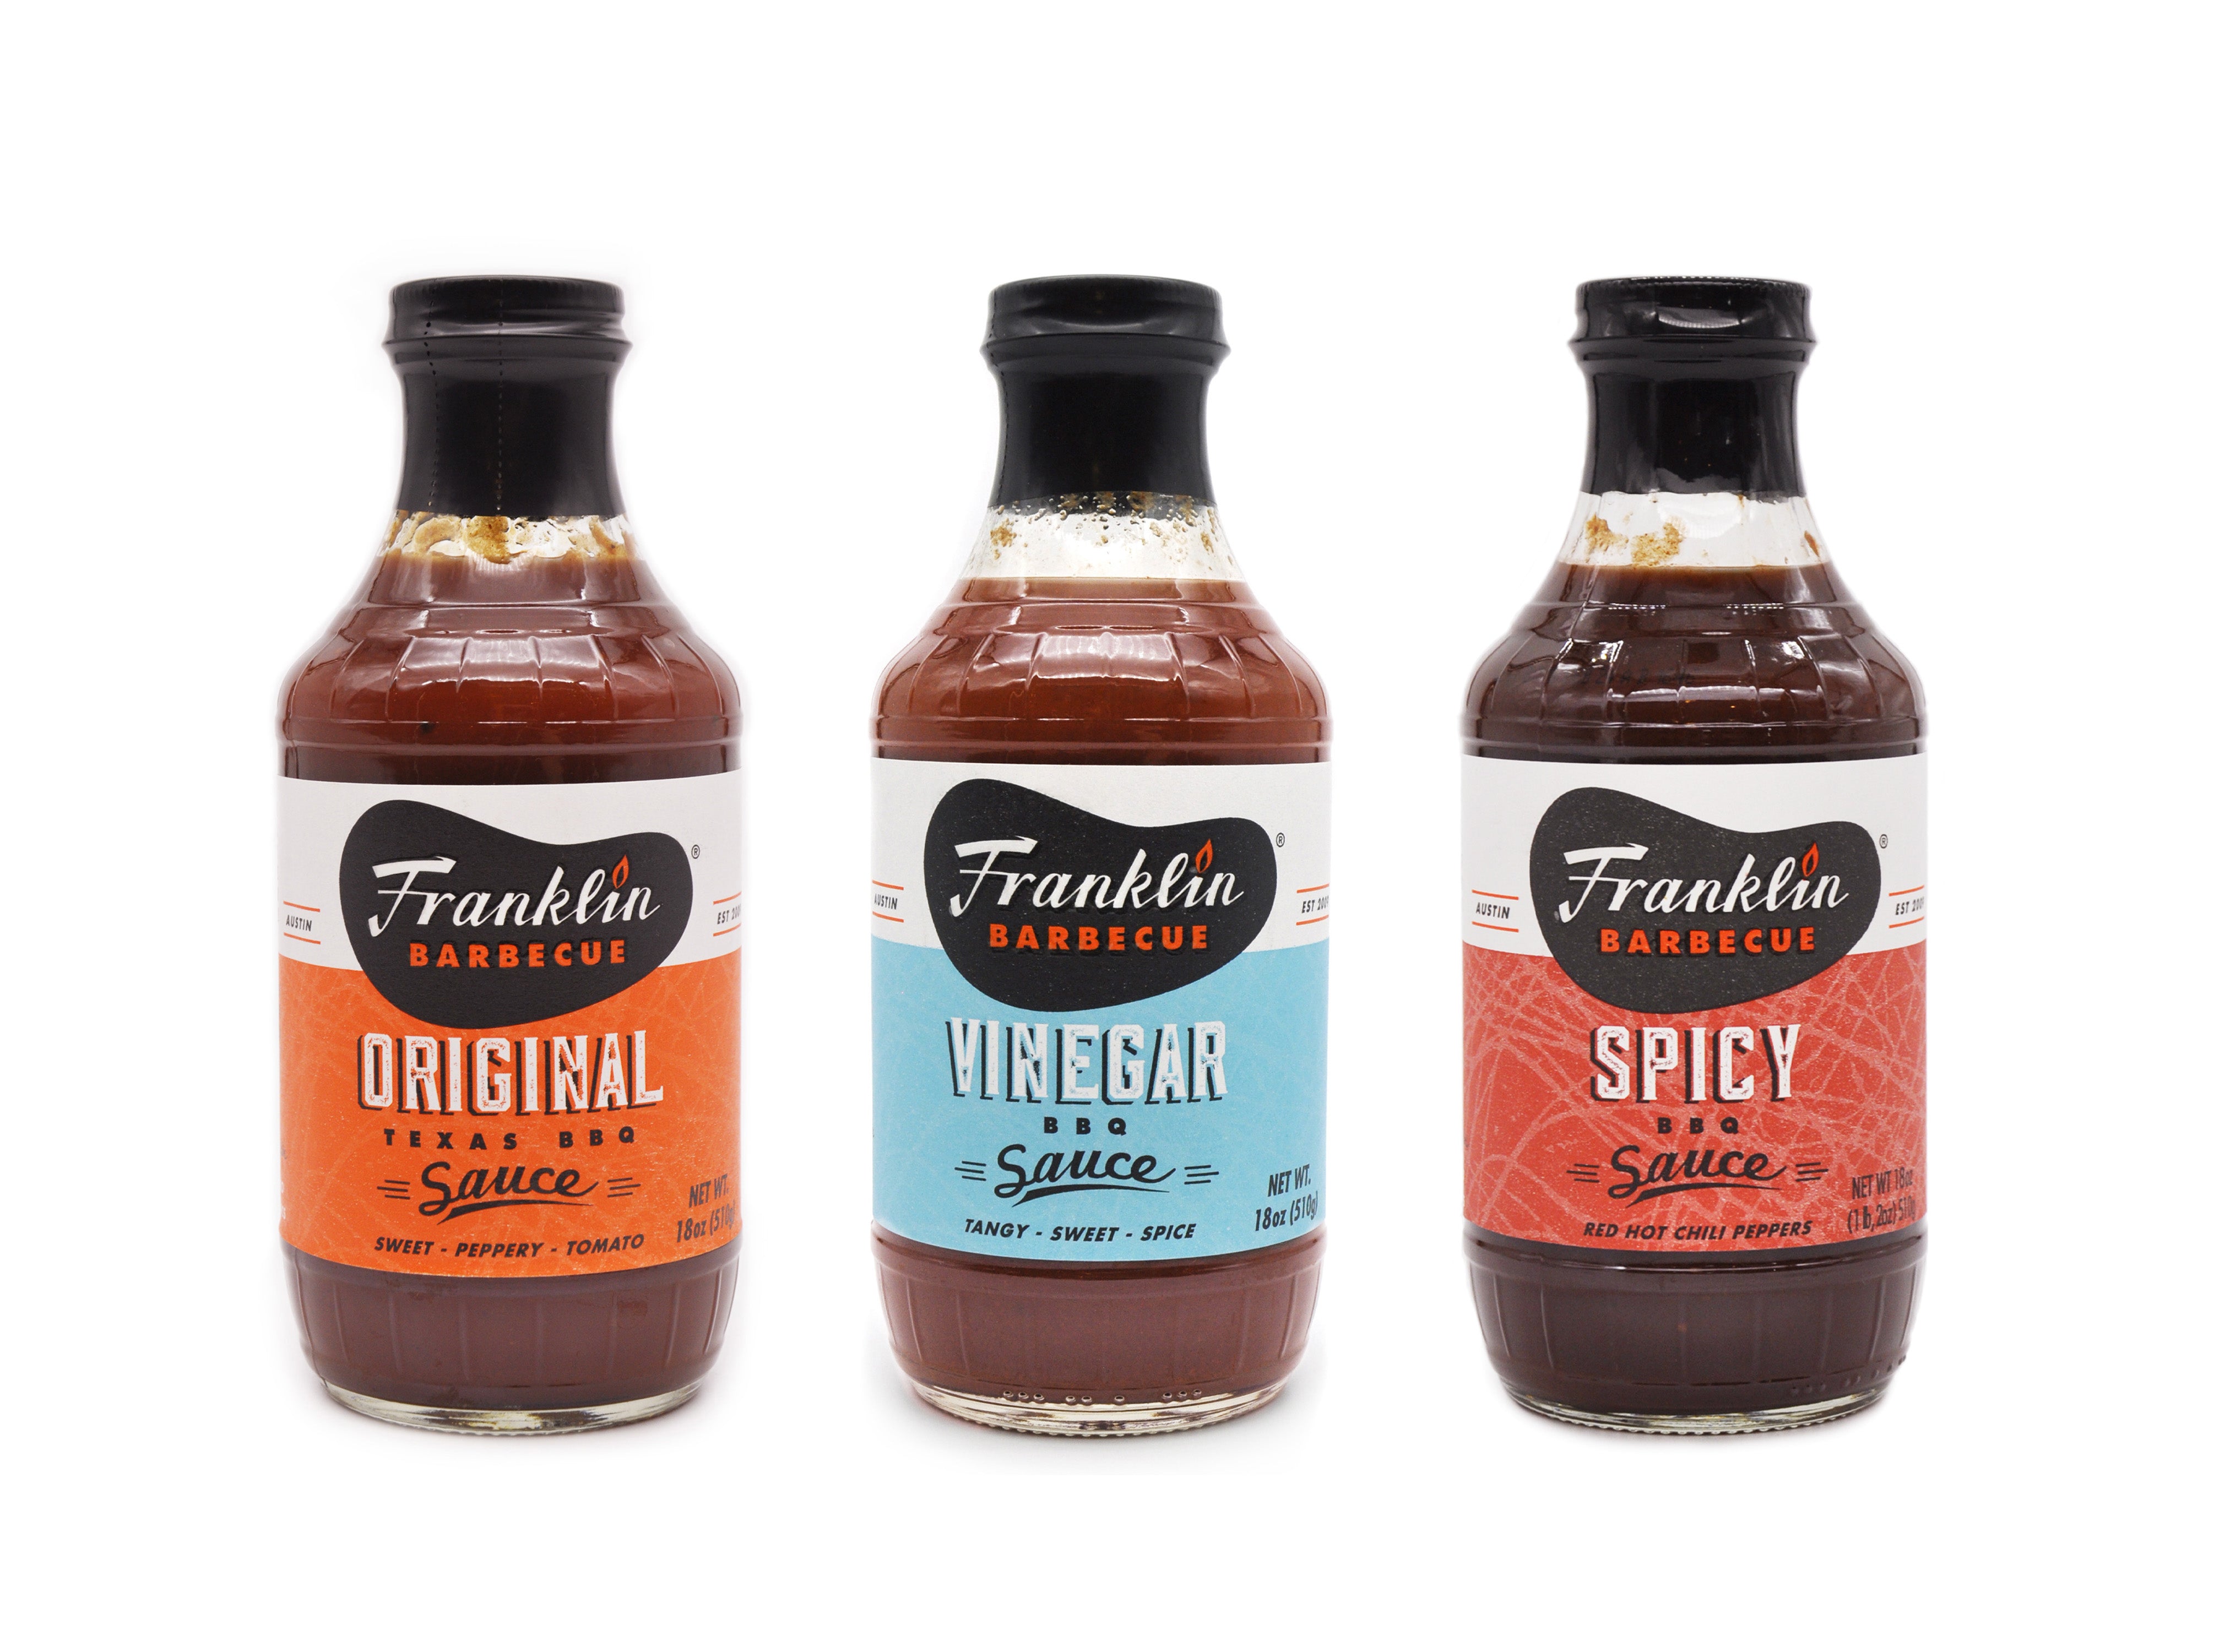 Trio of Franklin Barbecue sauces. One bottle each of original sauce, vinegar sauce and spicy sauce.